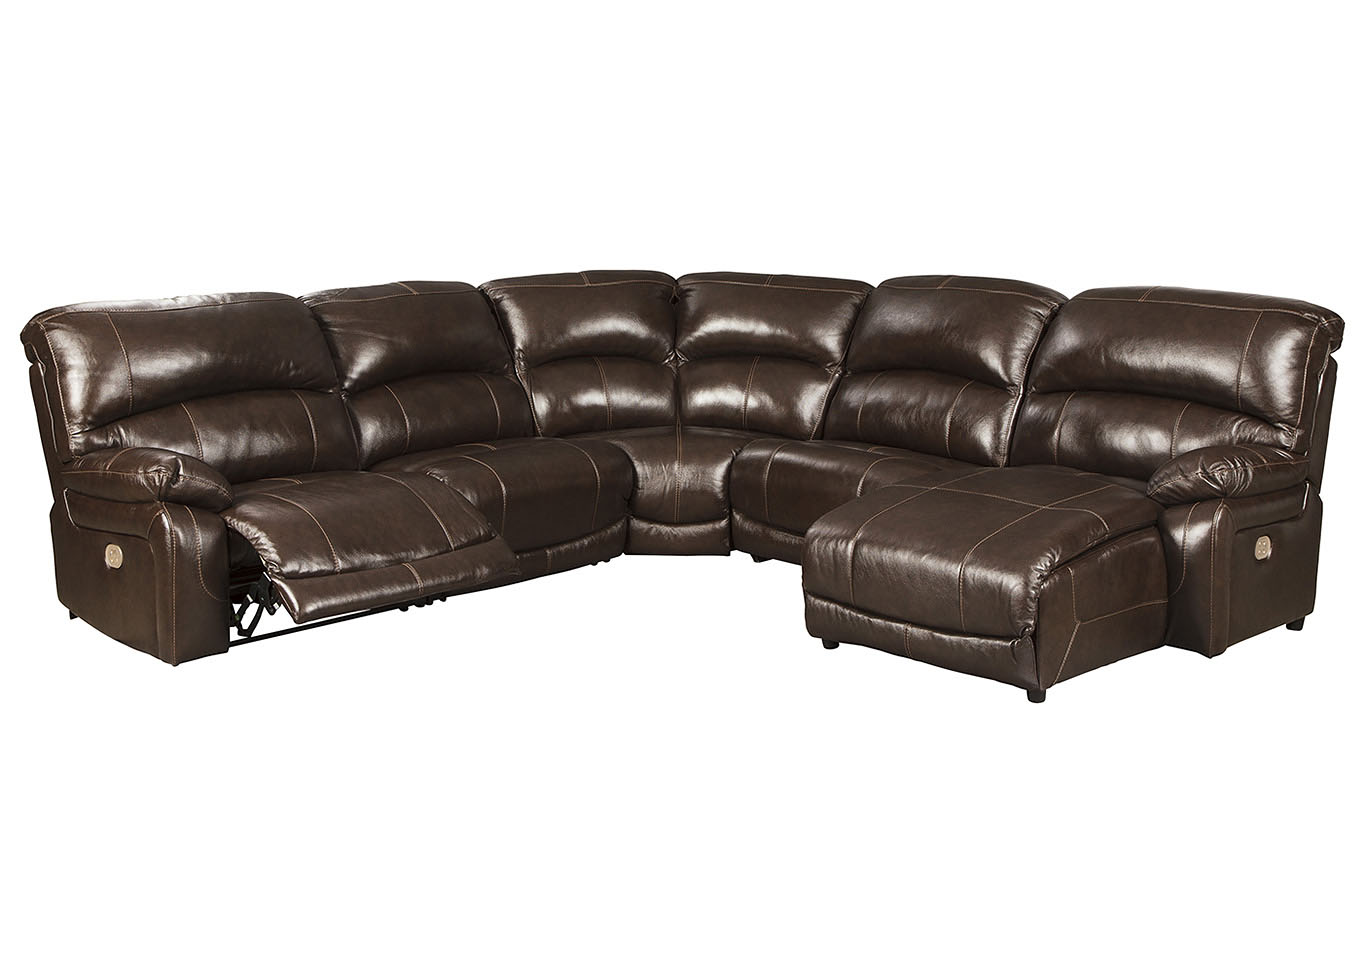 Laughlin Furniture Shelby Nc Hallstrung Chocolate Reclining